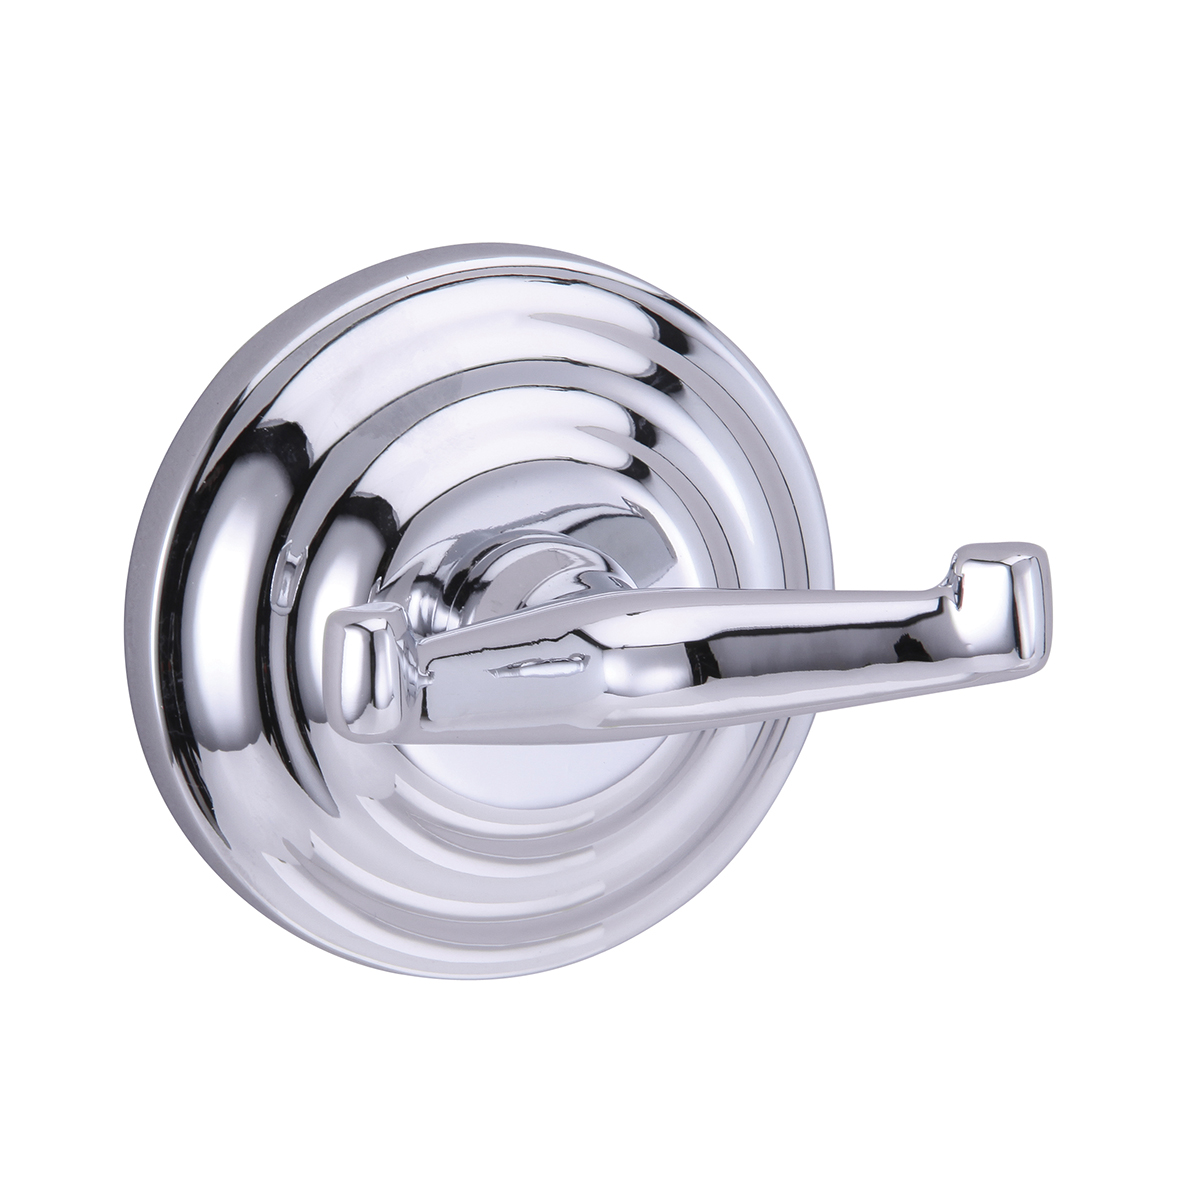 Brentwood - Double Robe Hook - Double Robe Hook - Polished ChromeBrentwood - Double Robe Hook - Double Robe Hook - Polished Chrome